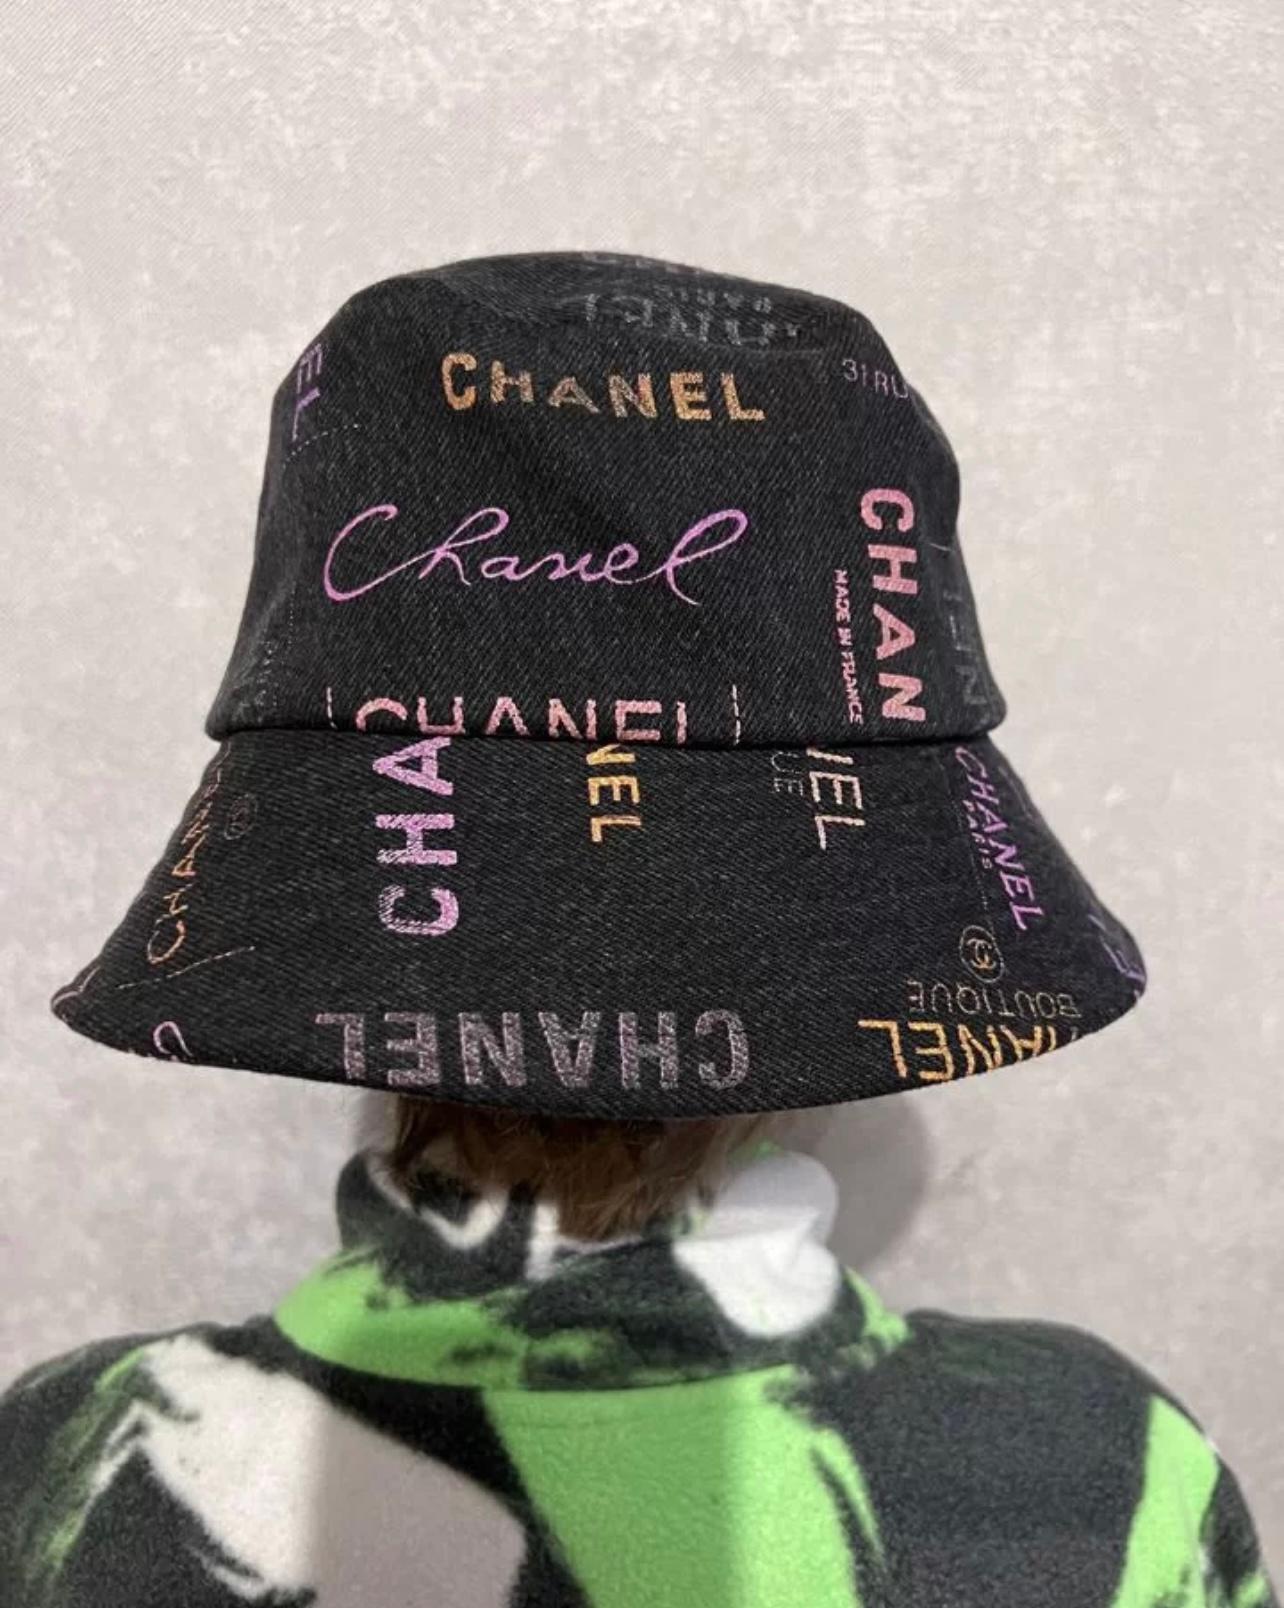 New Chanel black denim bucket hat with pale pink / orange logo from 2022 Spring Collection, 22P
Size mark M. Never worn.